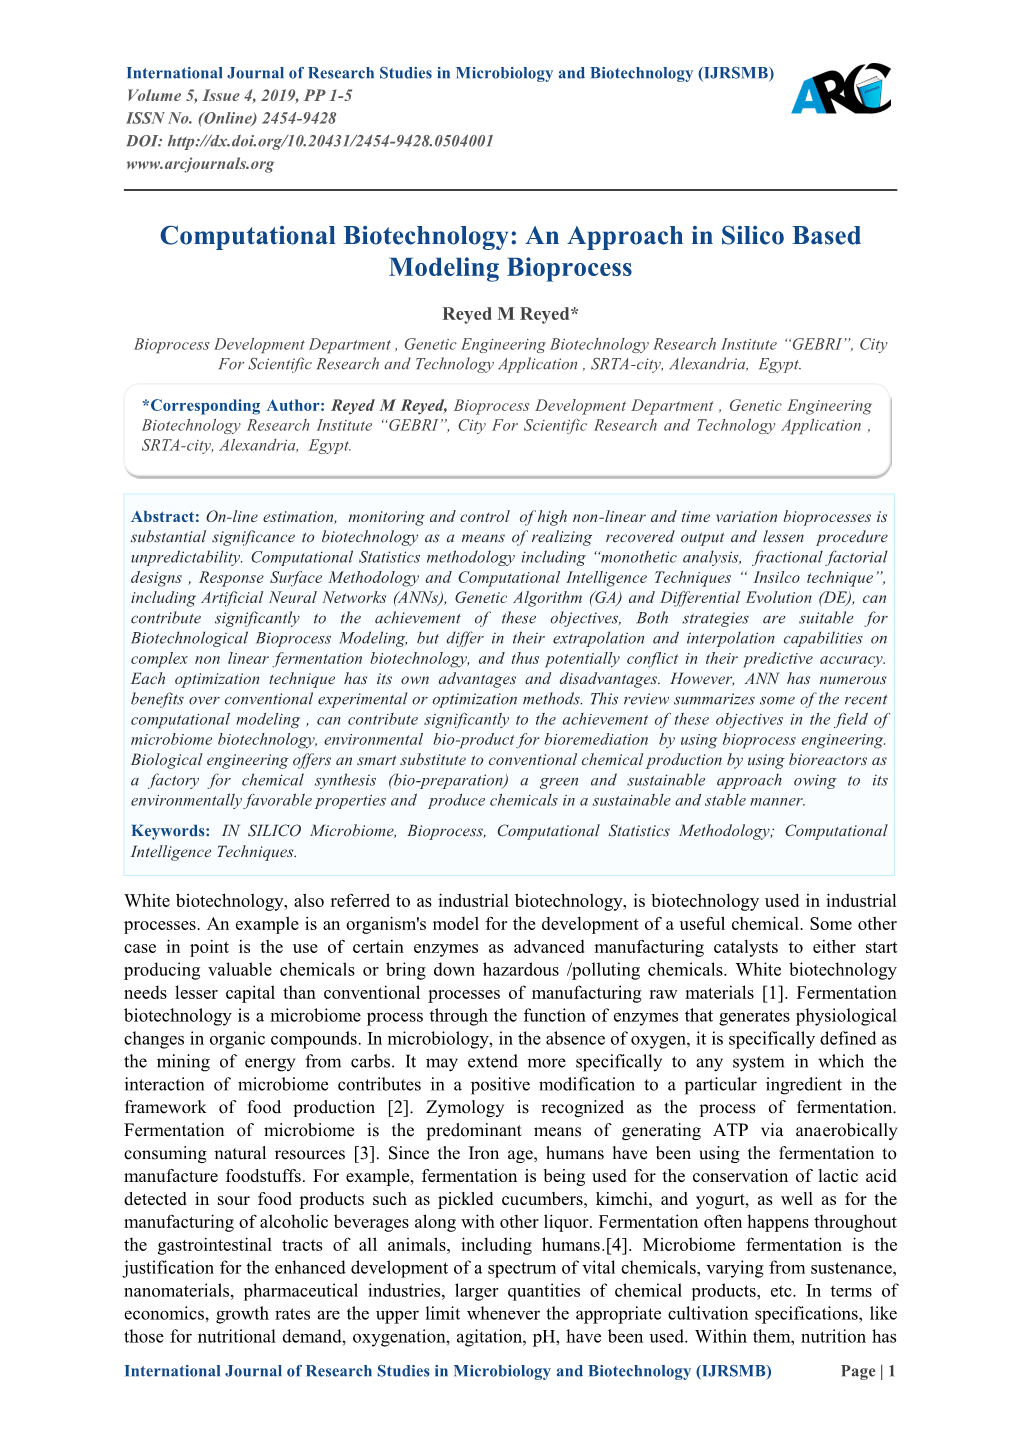 Computational Biotechnology: an Approach in Silico Based Modeling Bioprocess